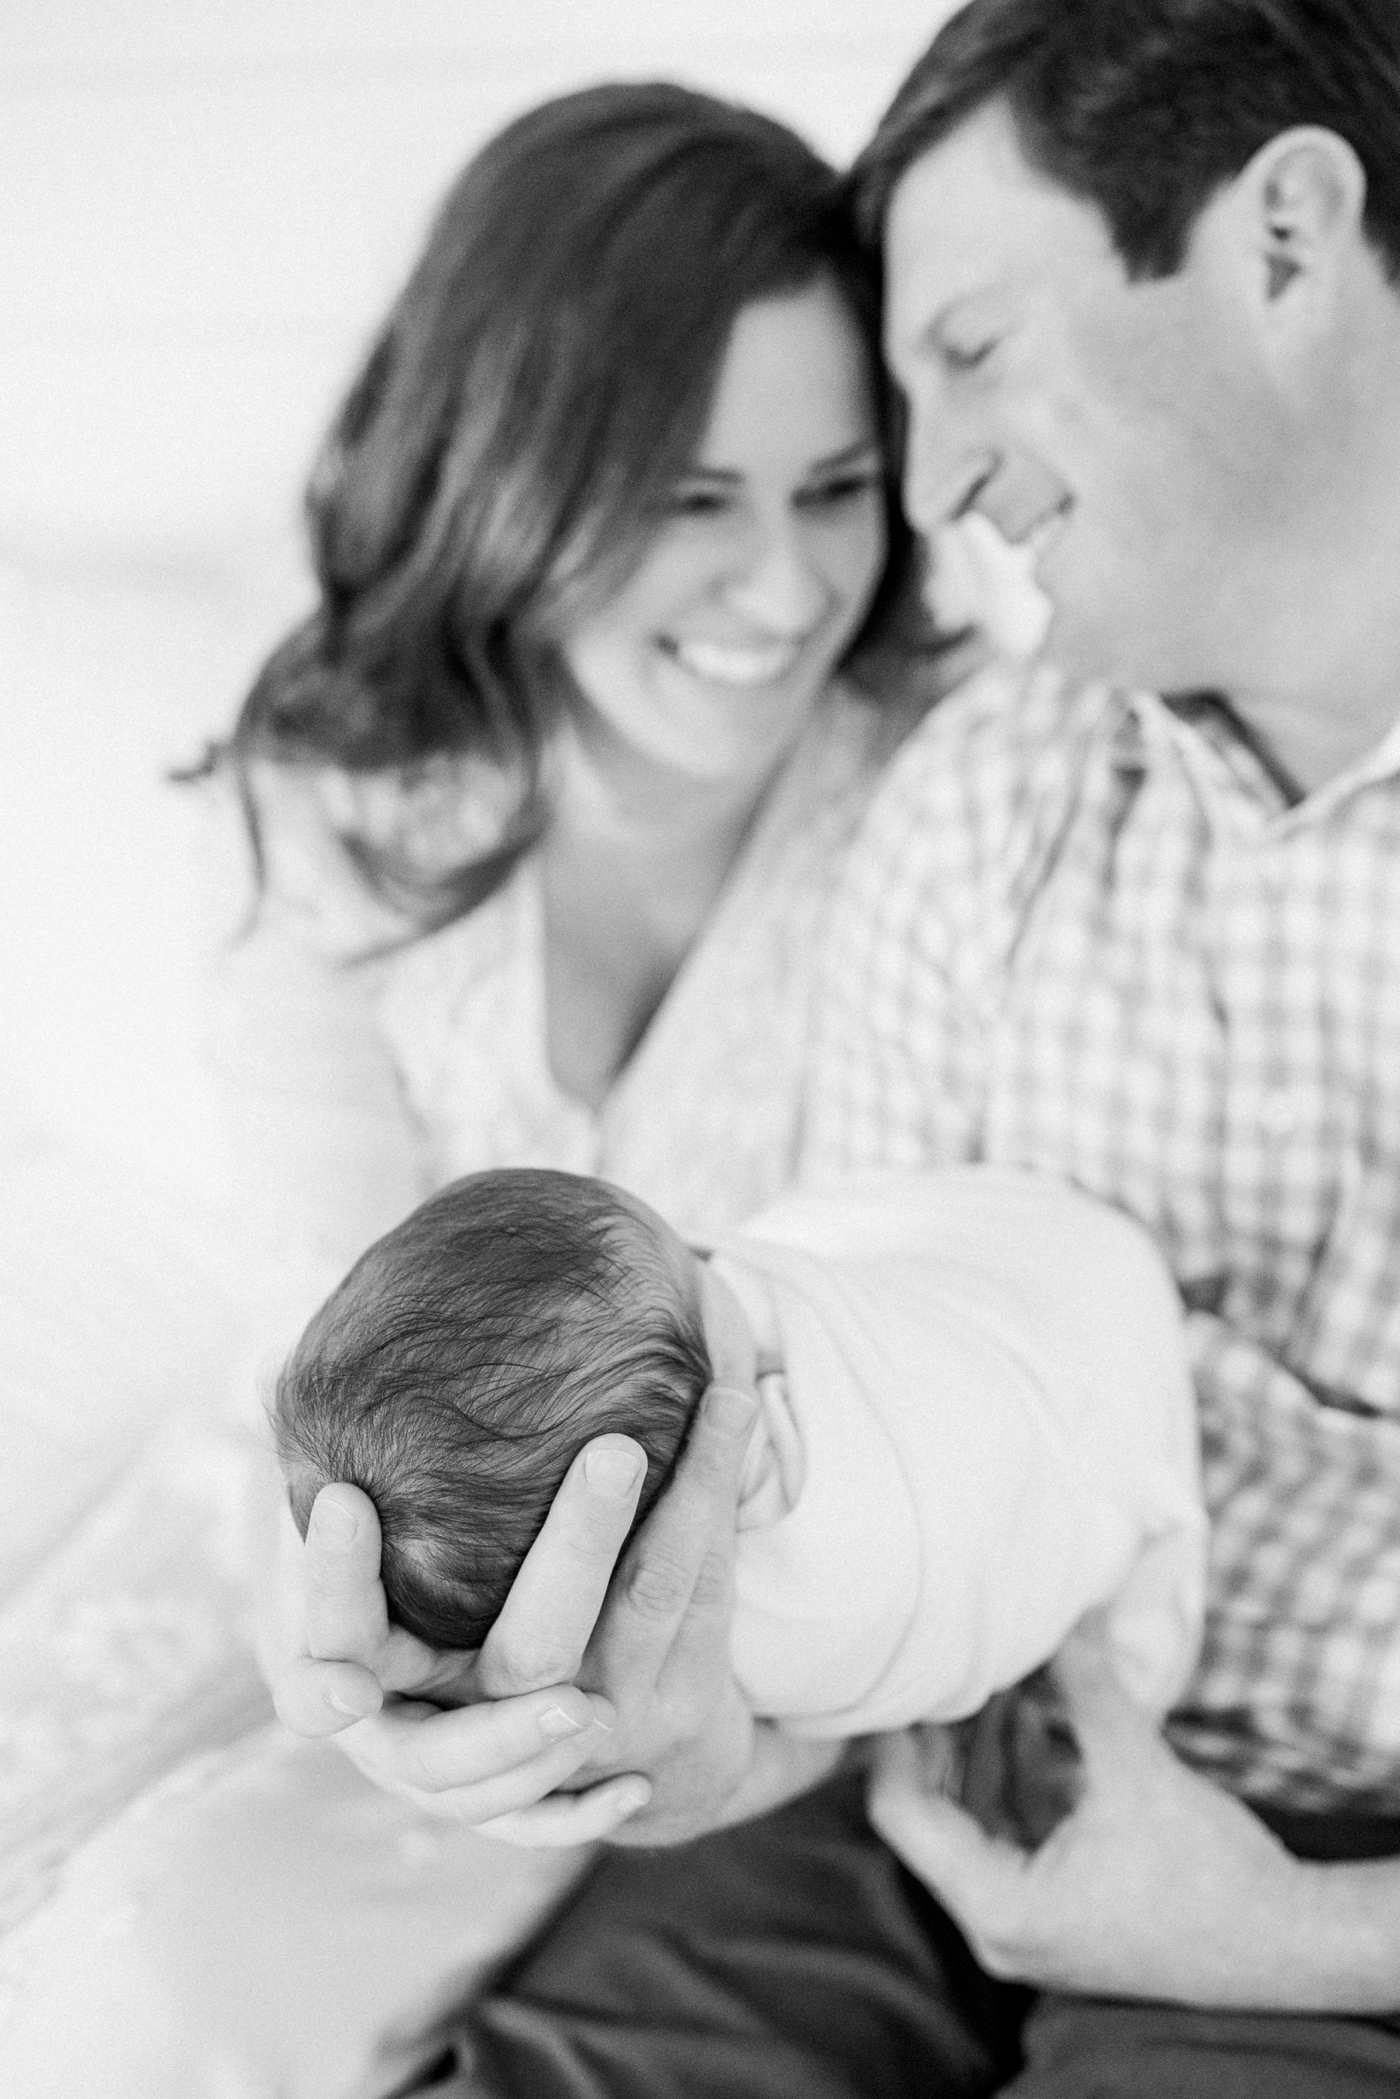 Mom and dad holding their new baby during their in home newborn session | Photo by Caitlyn Motycka Photography.